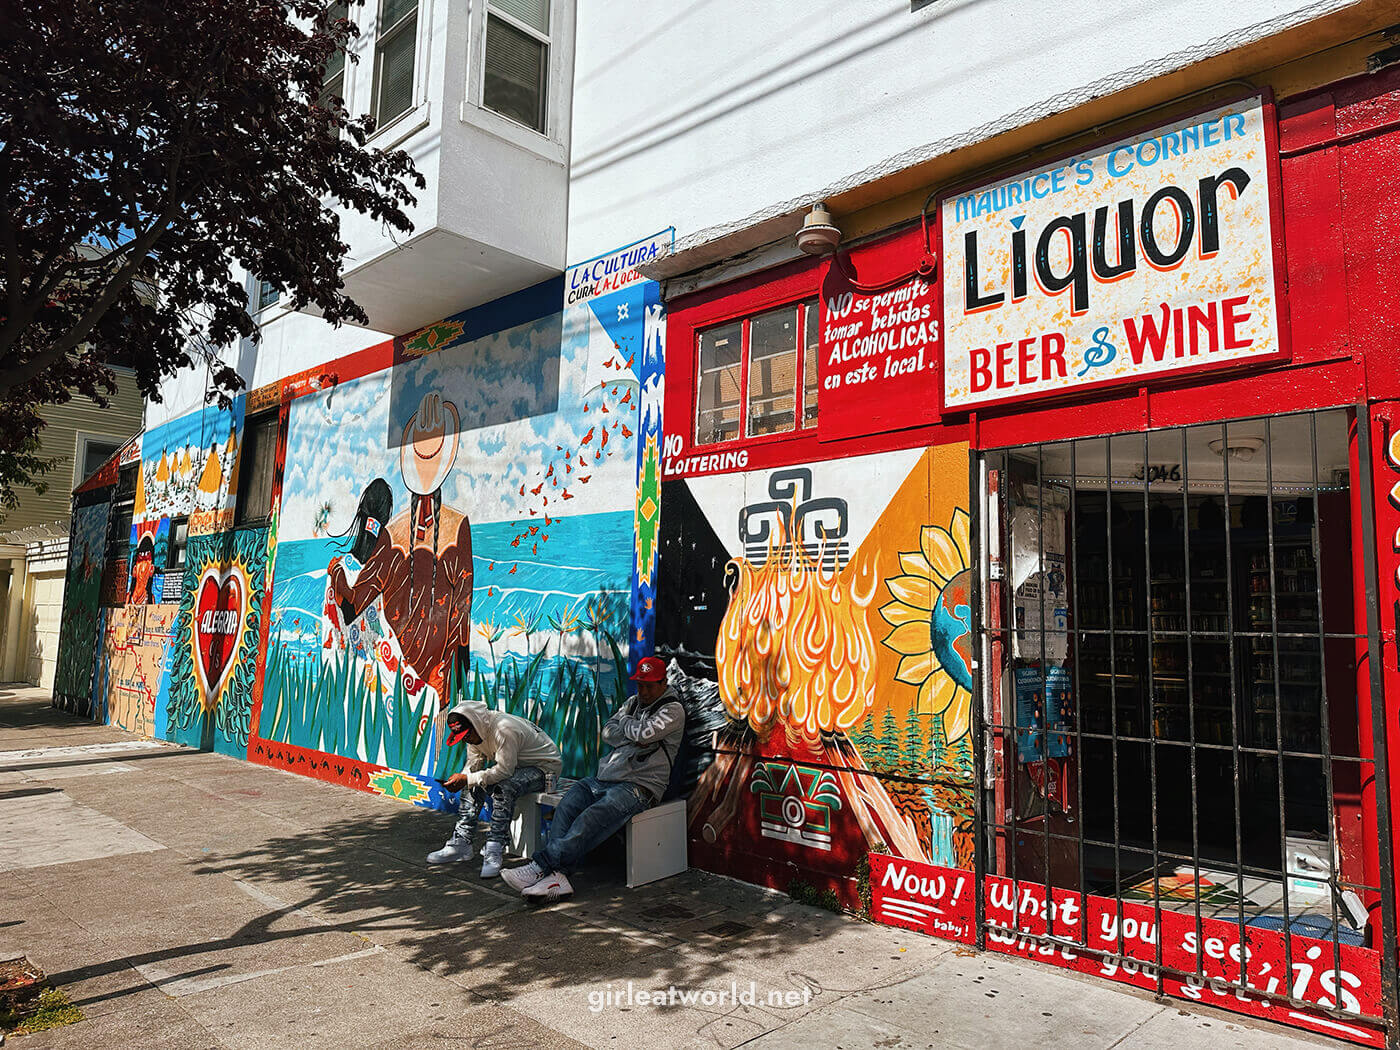 San Francisco Itinerary - Murals and colorful buildings in Mission District